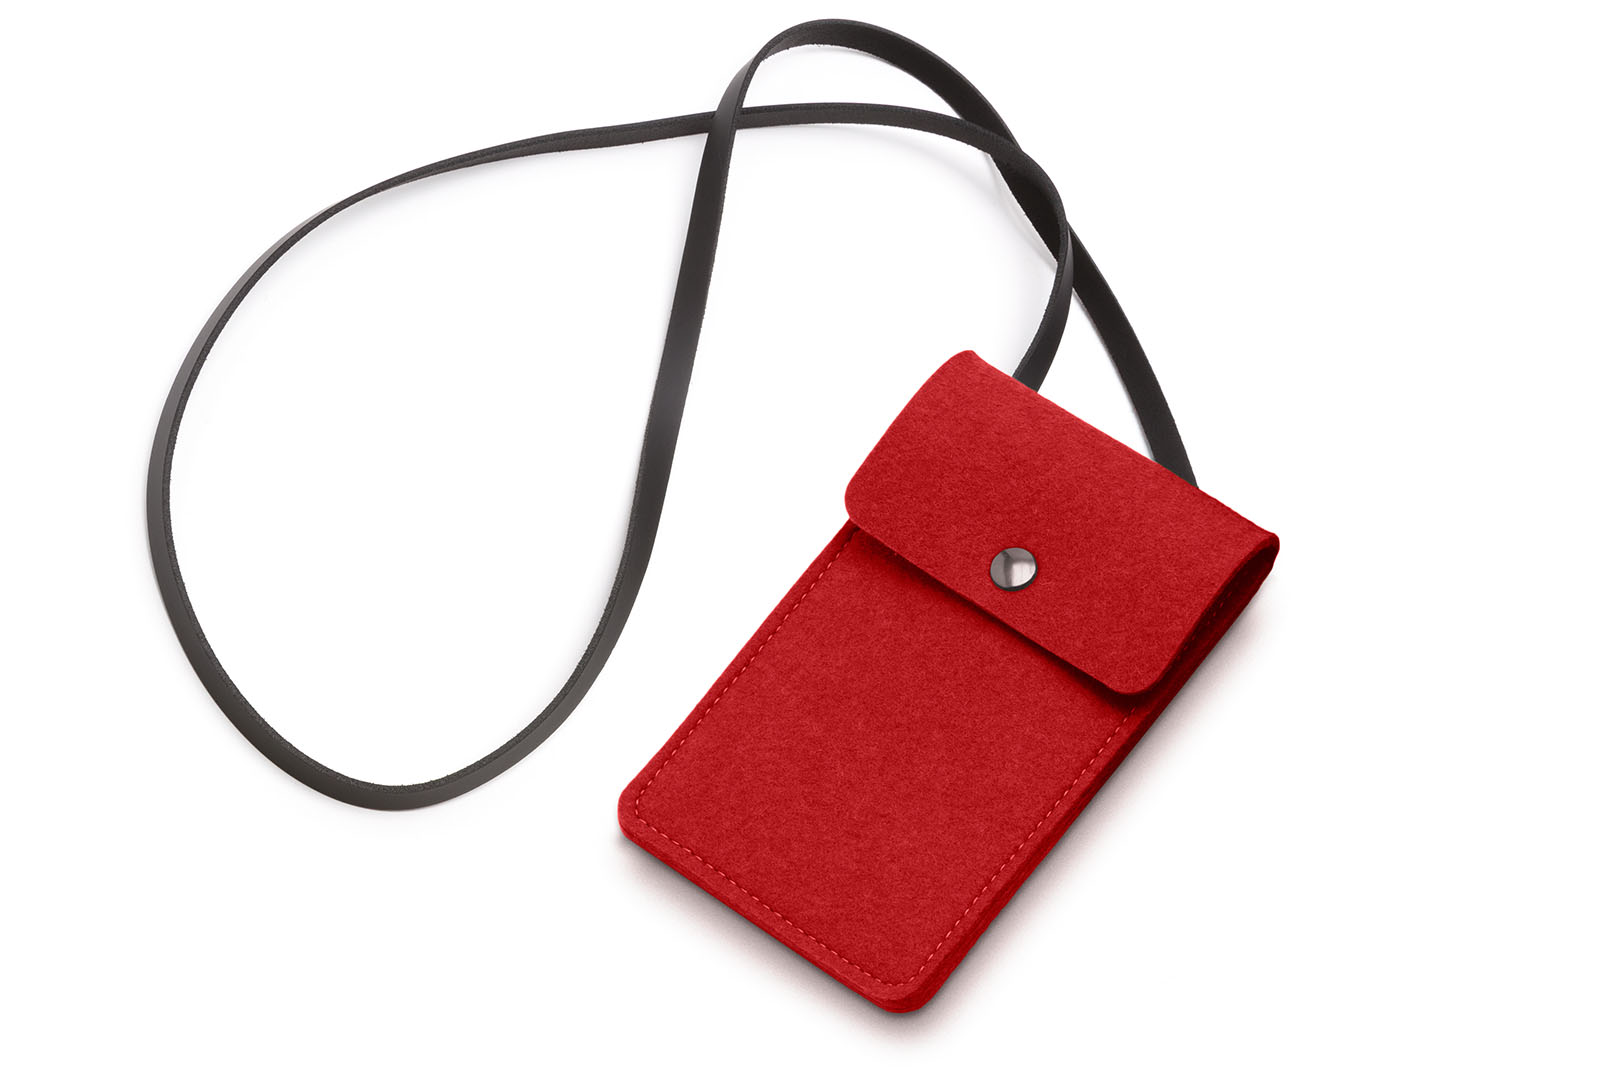 HEY-Sign Smart Bag in der Farbe "Rot"